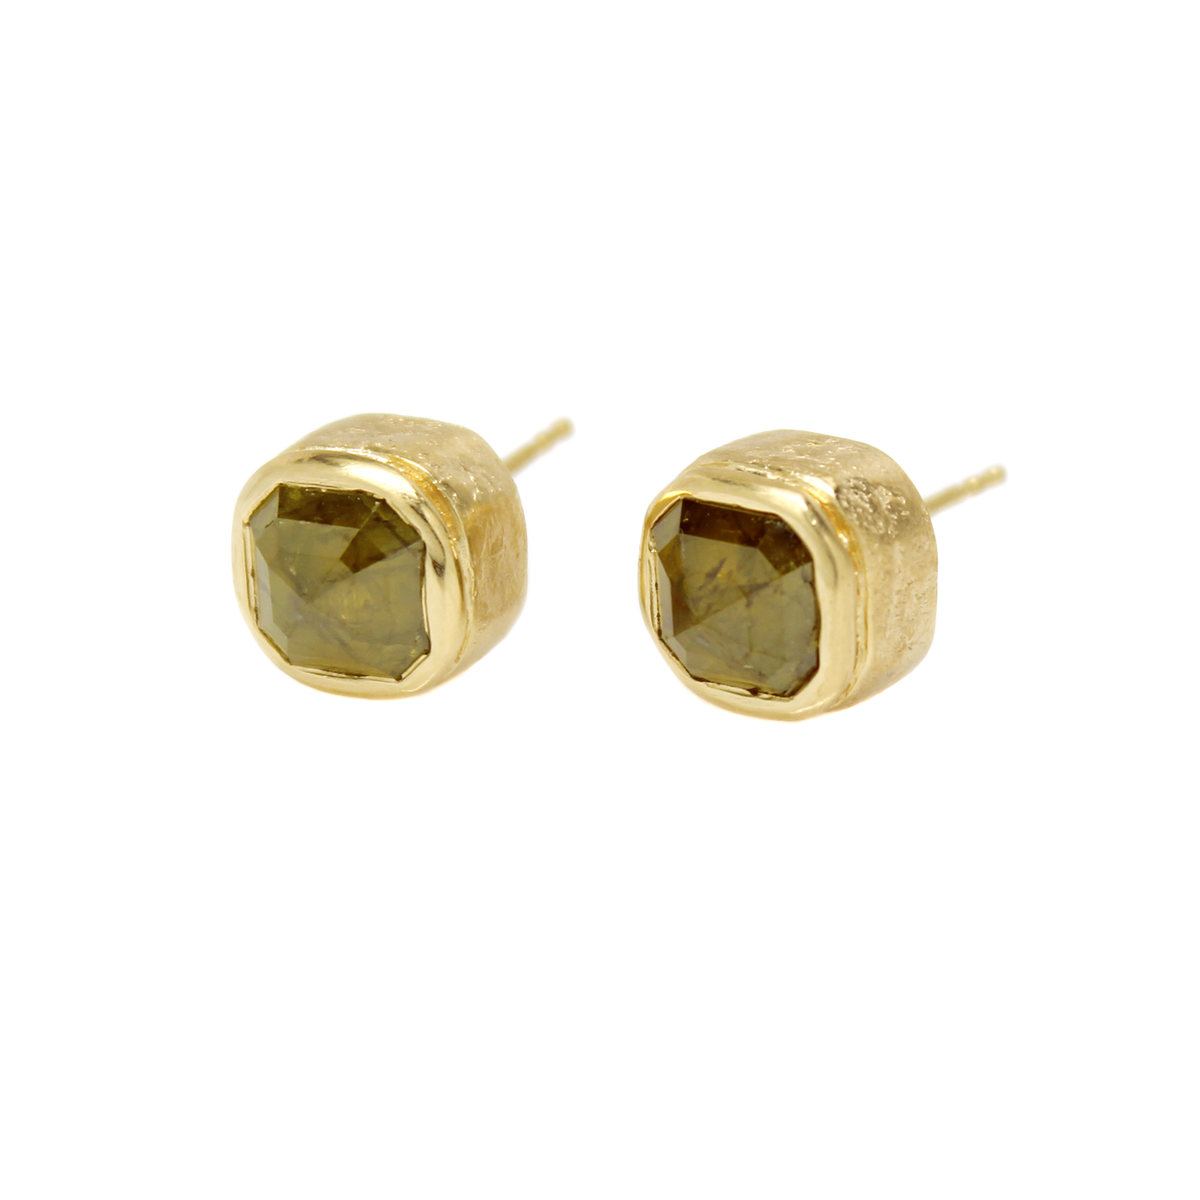 One-of-a-Kind Golden Emerald Shaped Diamond Studs